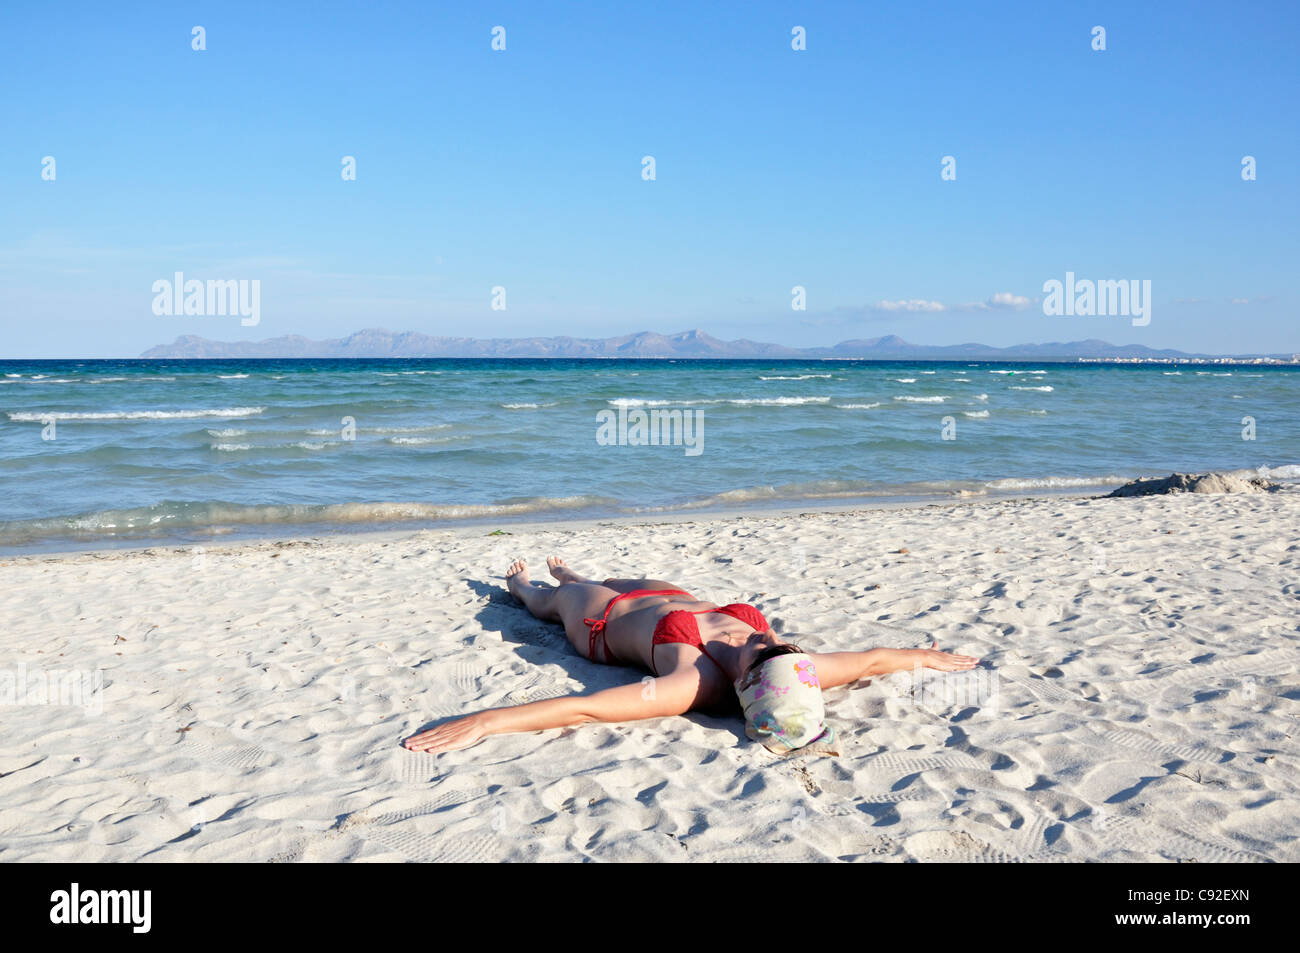 Mid adult woman sunbathing on beach, Alcudia, Mallorca, Spain, Europe Banque D'Images